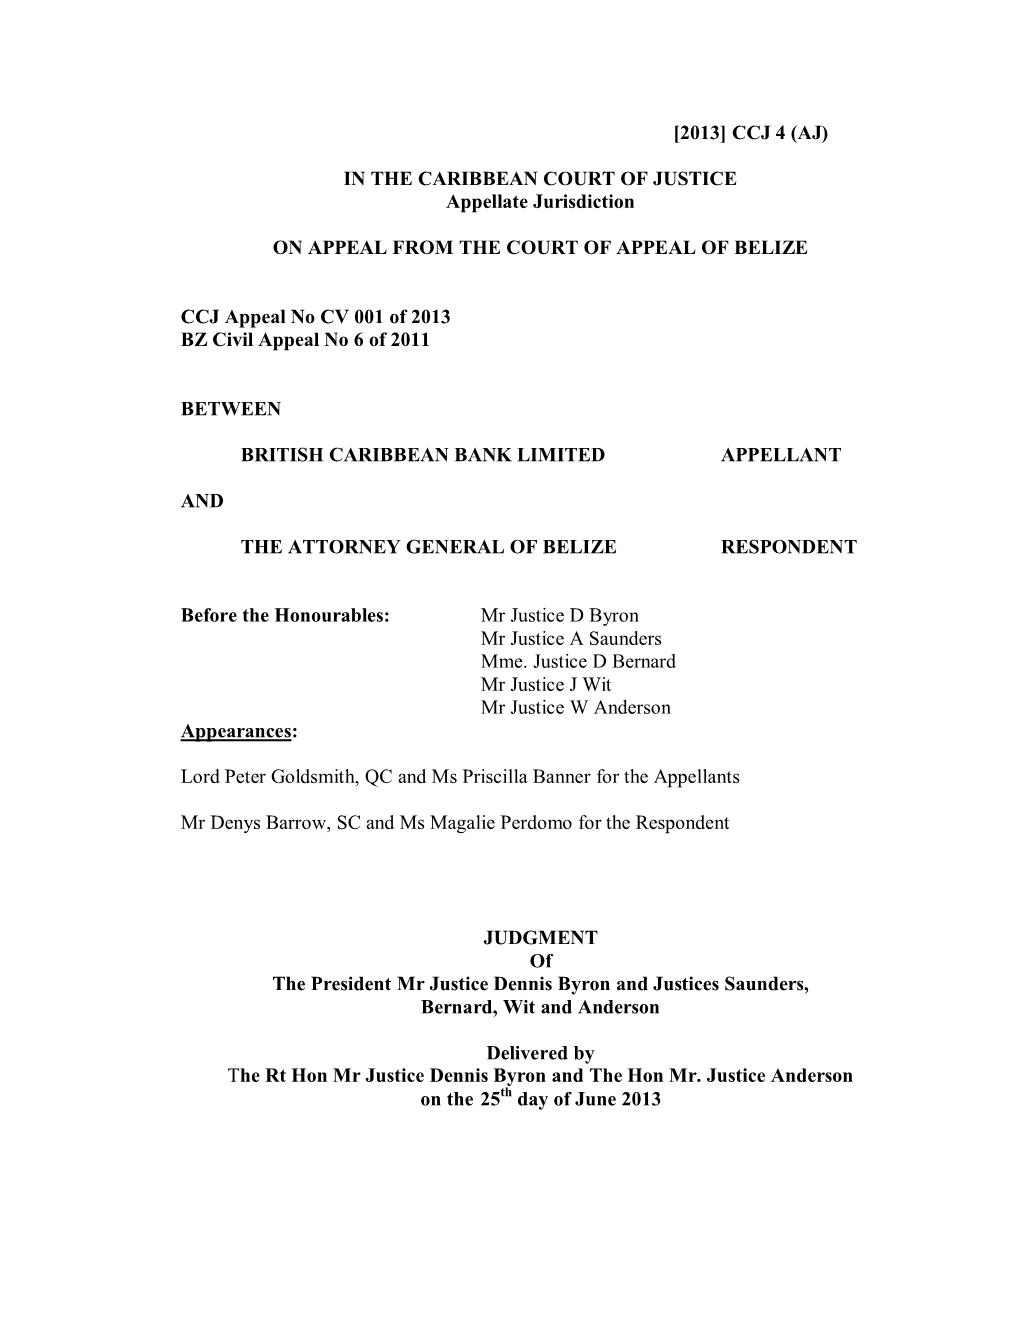 Judgment of the Caribbean Court of Justice, Regarding An